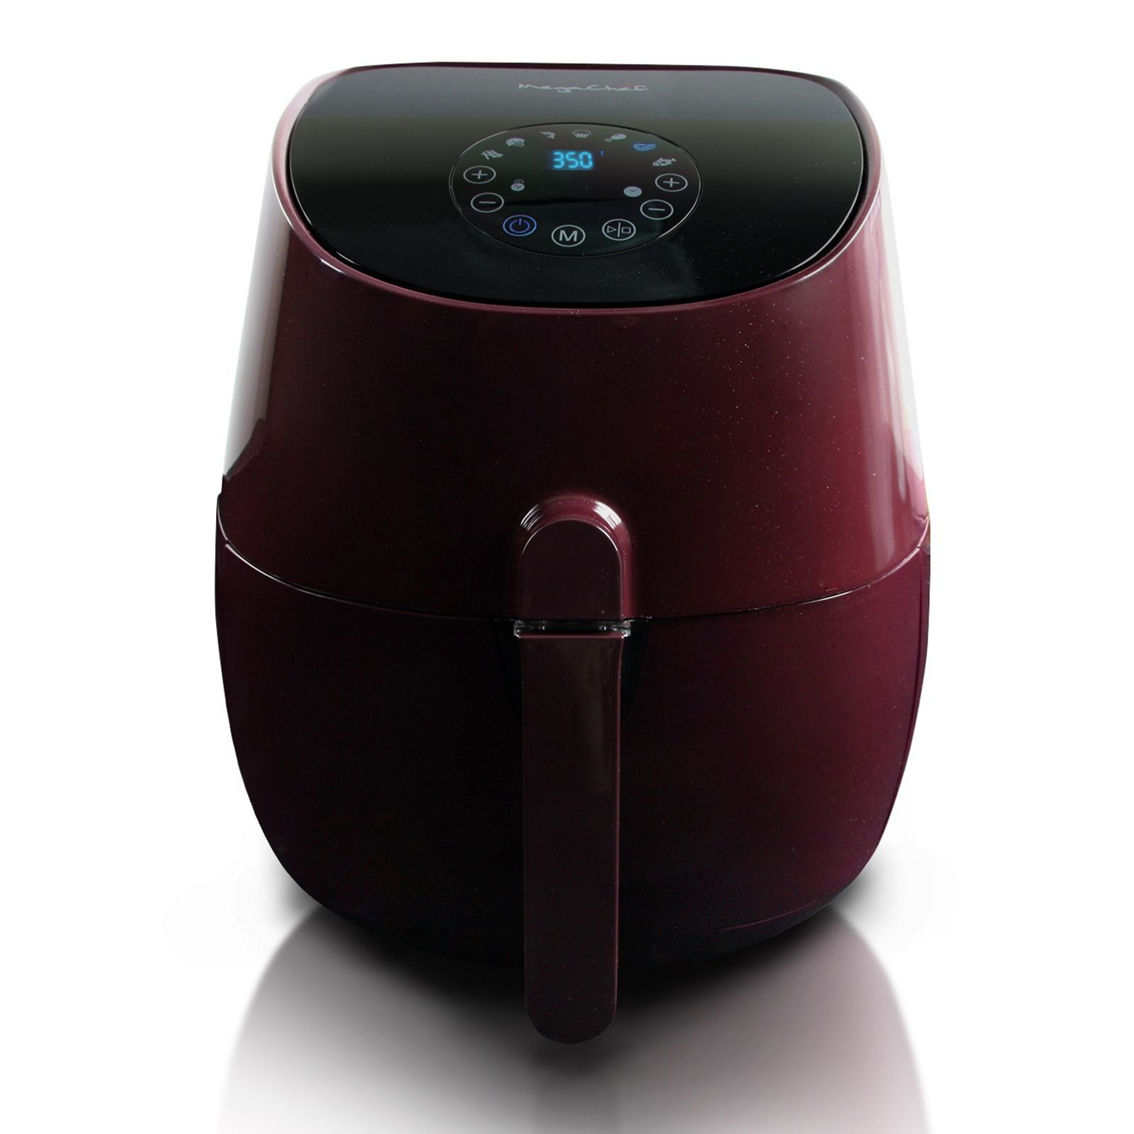 MegaChef 3.5 Quart Airfryer And Multicooker With 7 Pre-Programmed Settings in Bu - Image 5 of 5